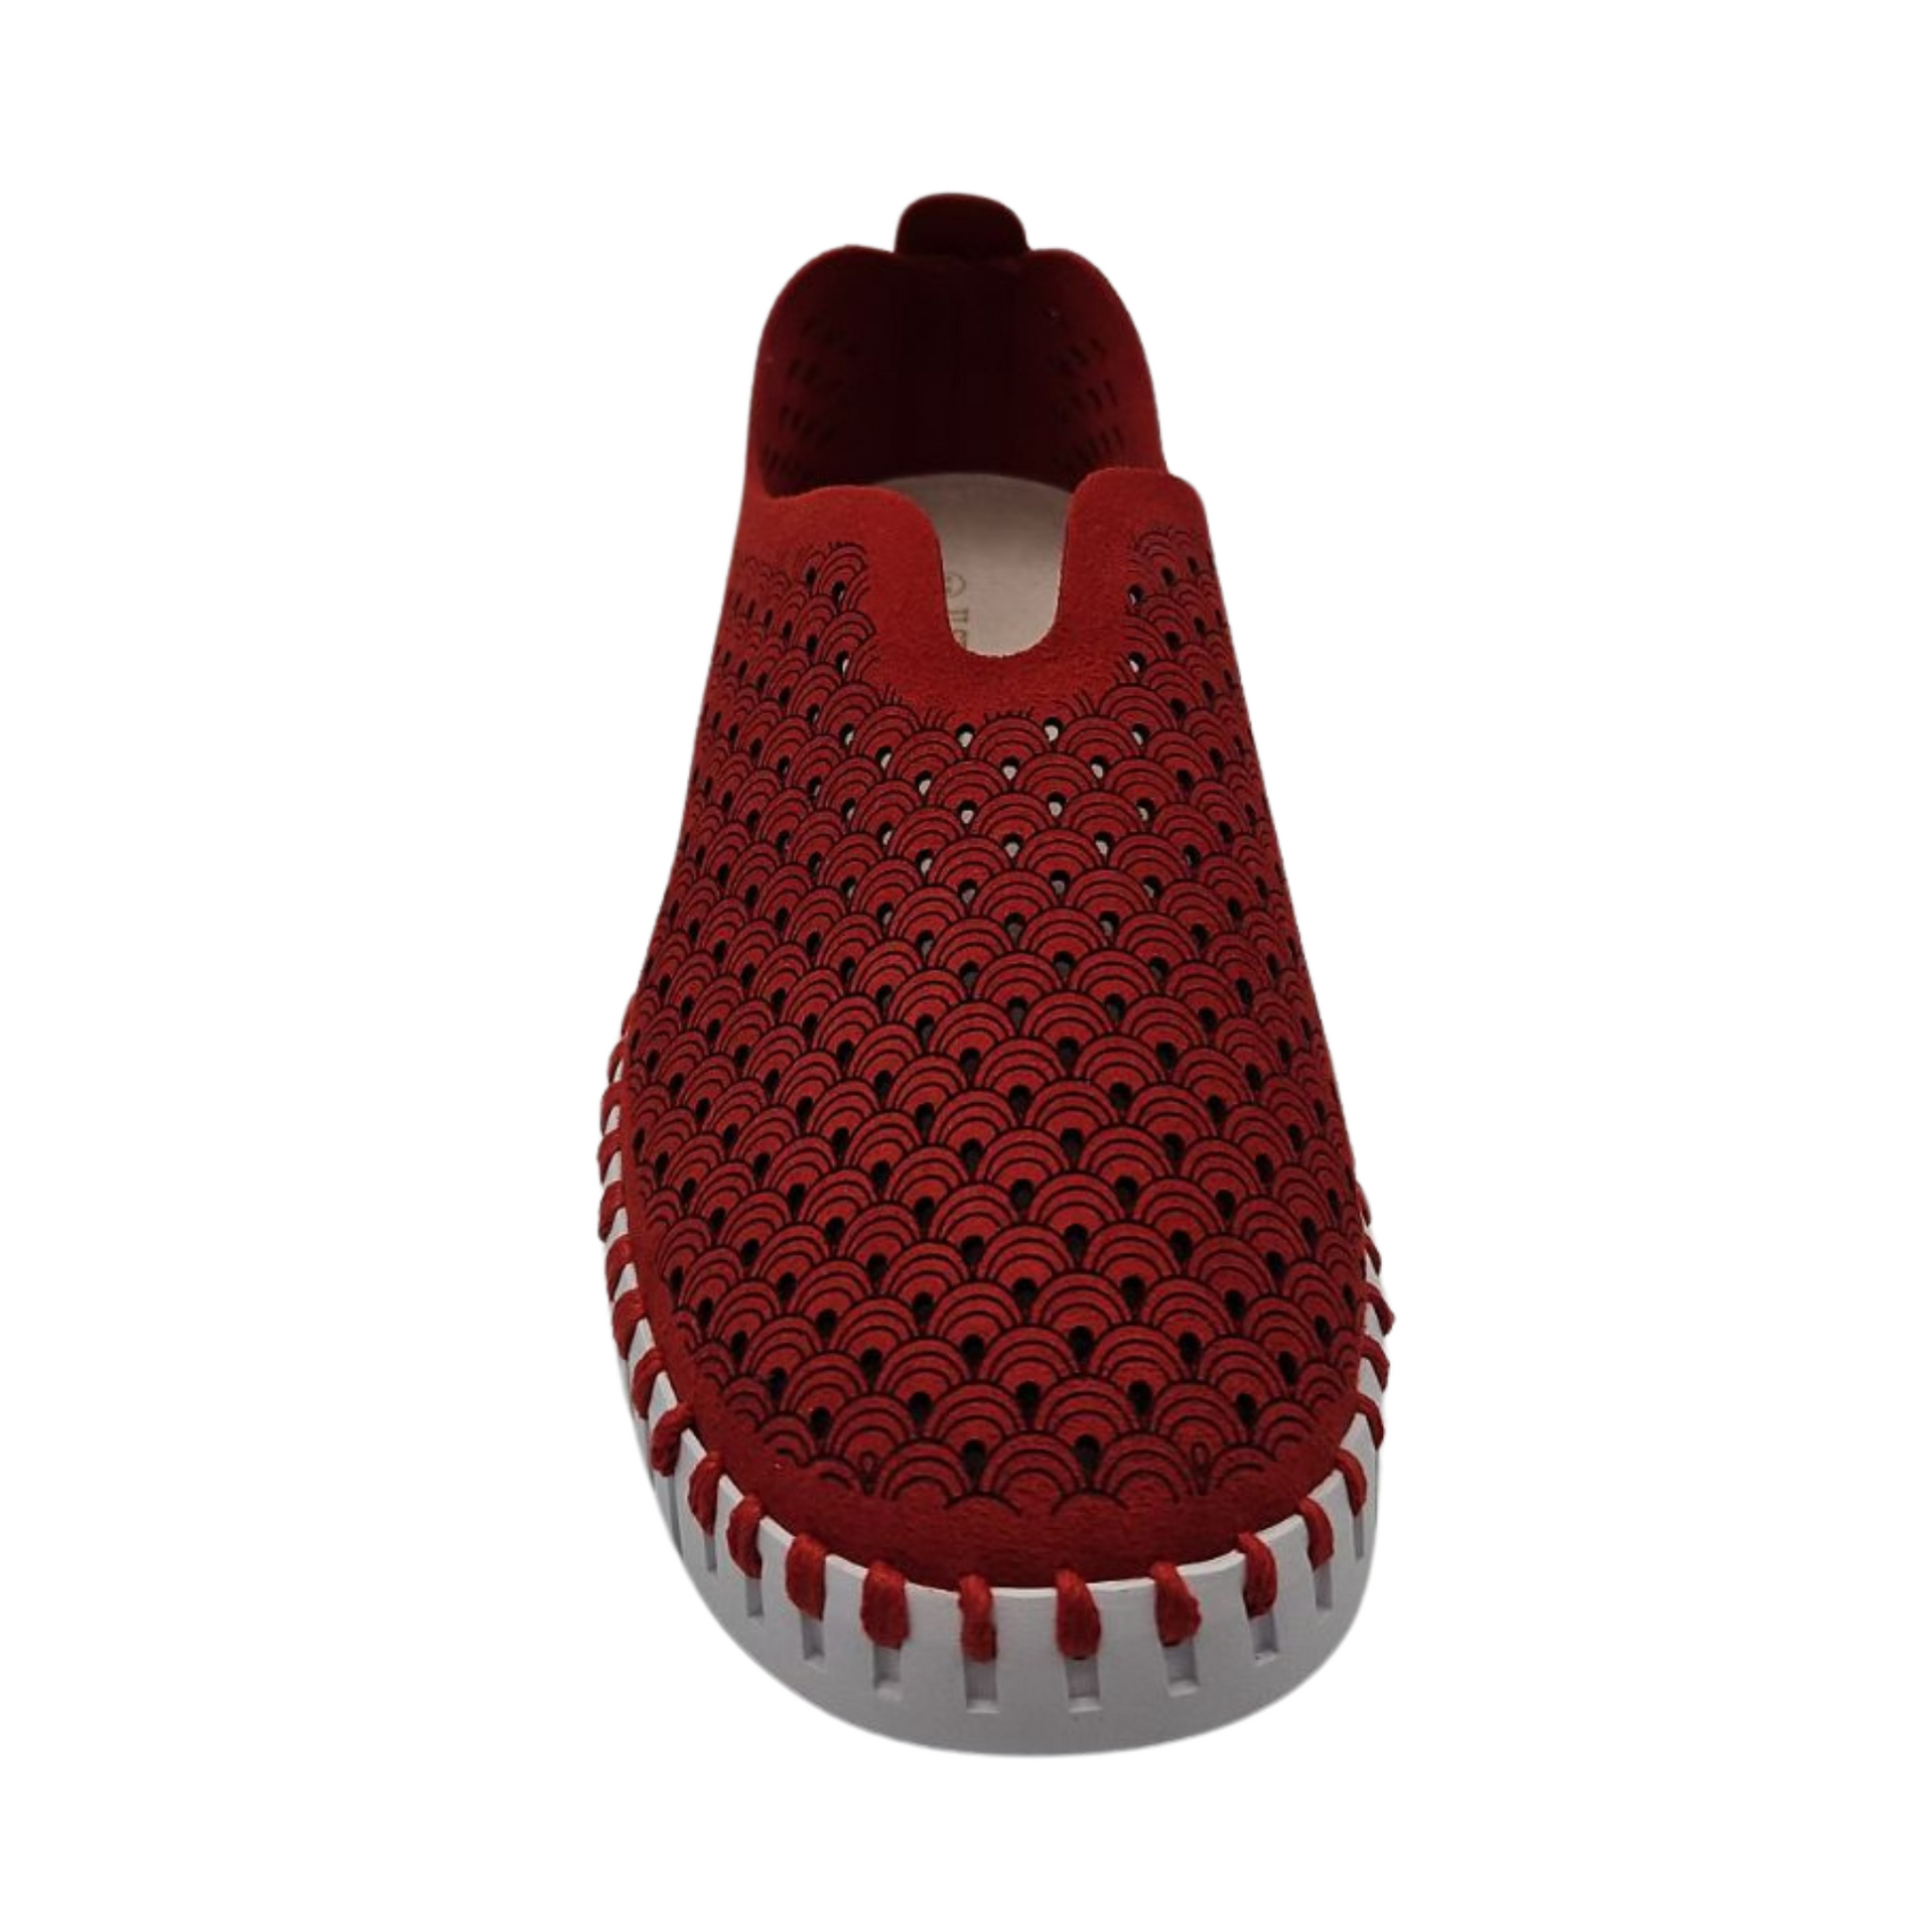 Front facingview of deep red mesh shoe with white rubber outsole